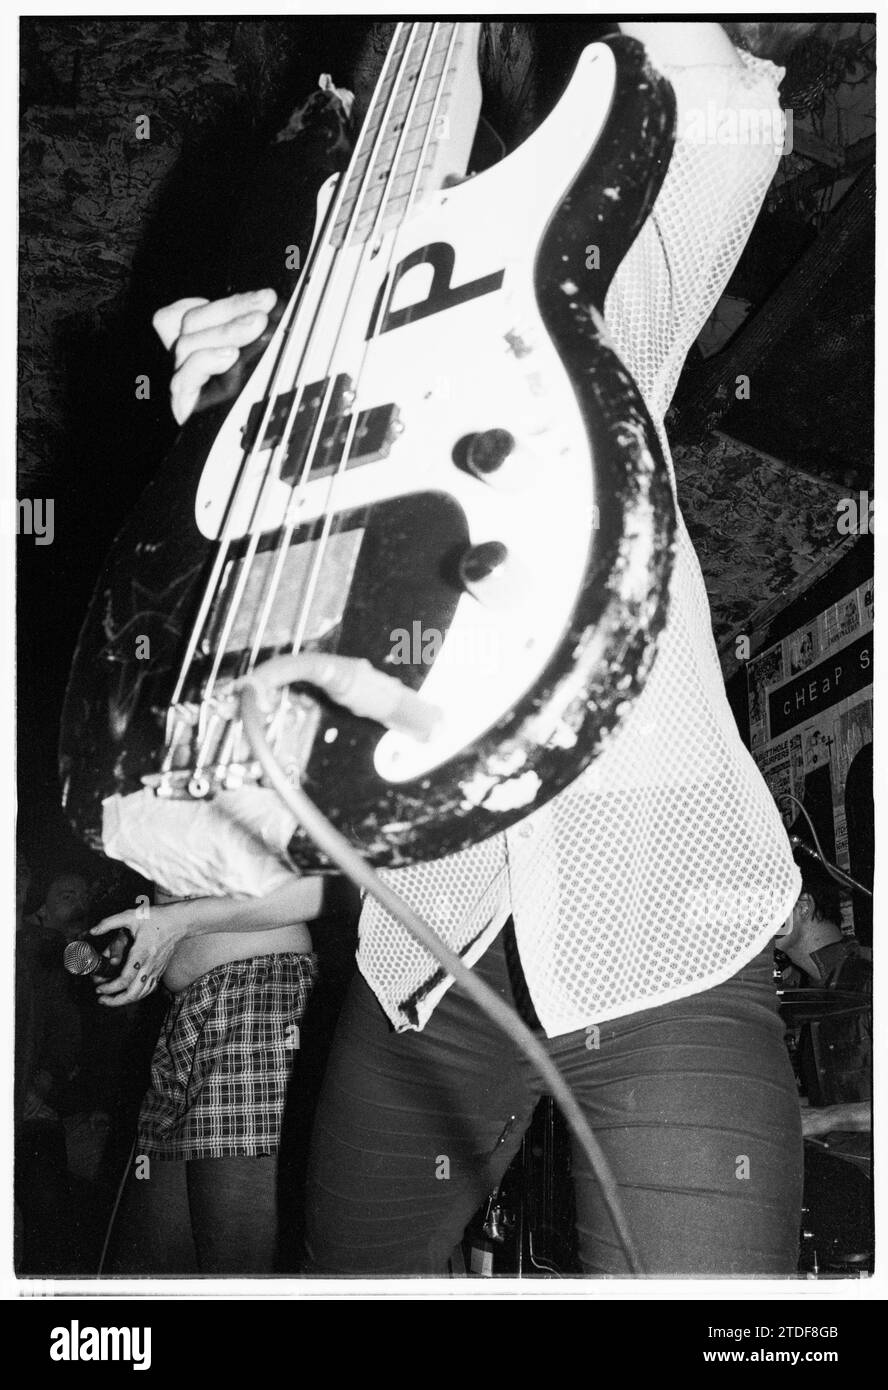 KATHLEEN HANNA, BIKINI KILL, NEWPORT TJS, 1993: Kathleen Hanna the singer of Bikini Kill hides the band from the camera with her bass guitar at the Legendary TJs in Newport, Wales, UK on 8 March 1993. This Bikini Kill/Huggy Bear Tour came at the peak of the Riot Grrrl scene and was to promote the two bands combined 1993 album Yeah Yeah Yeah Yeah (Kill Rock Stars). The gig started with a music workshop for women only. Photo: Rob Watkins Stock Photo